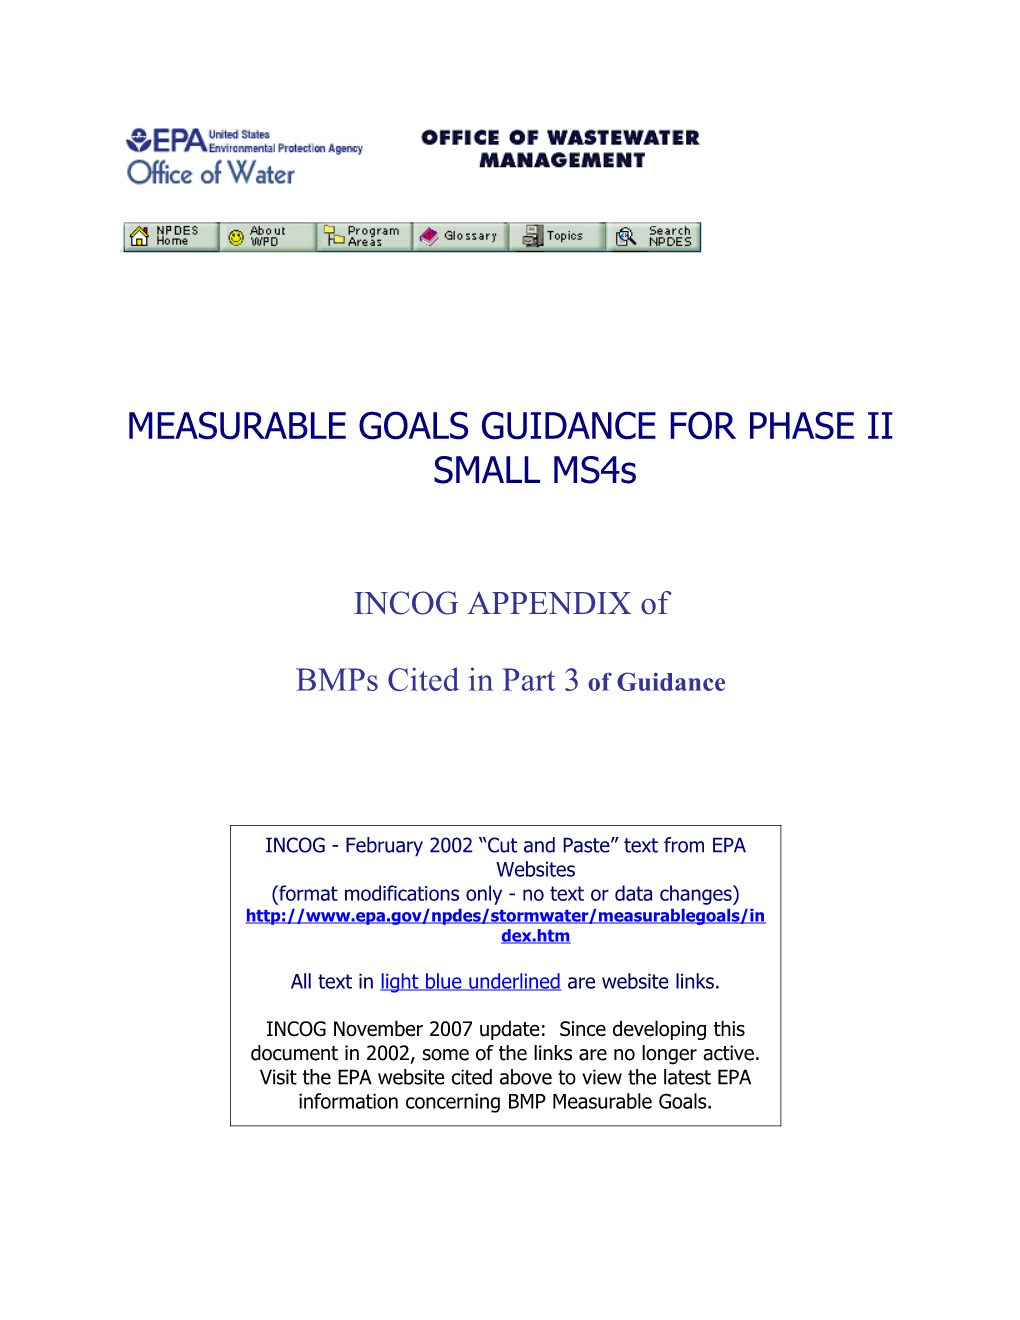 MEASURABLE GOALS GUIDANCE for PHASE II SMALL Ms4s